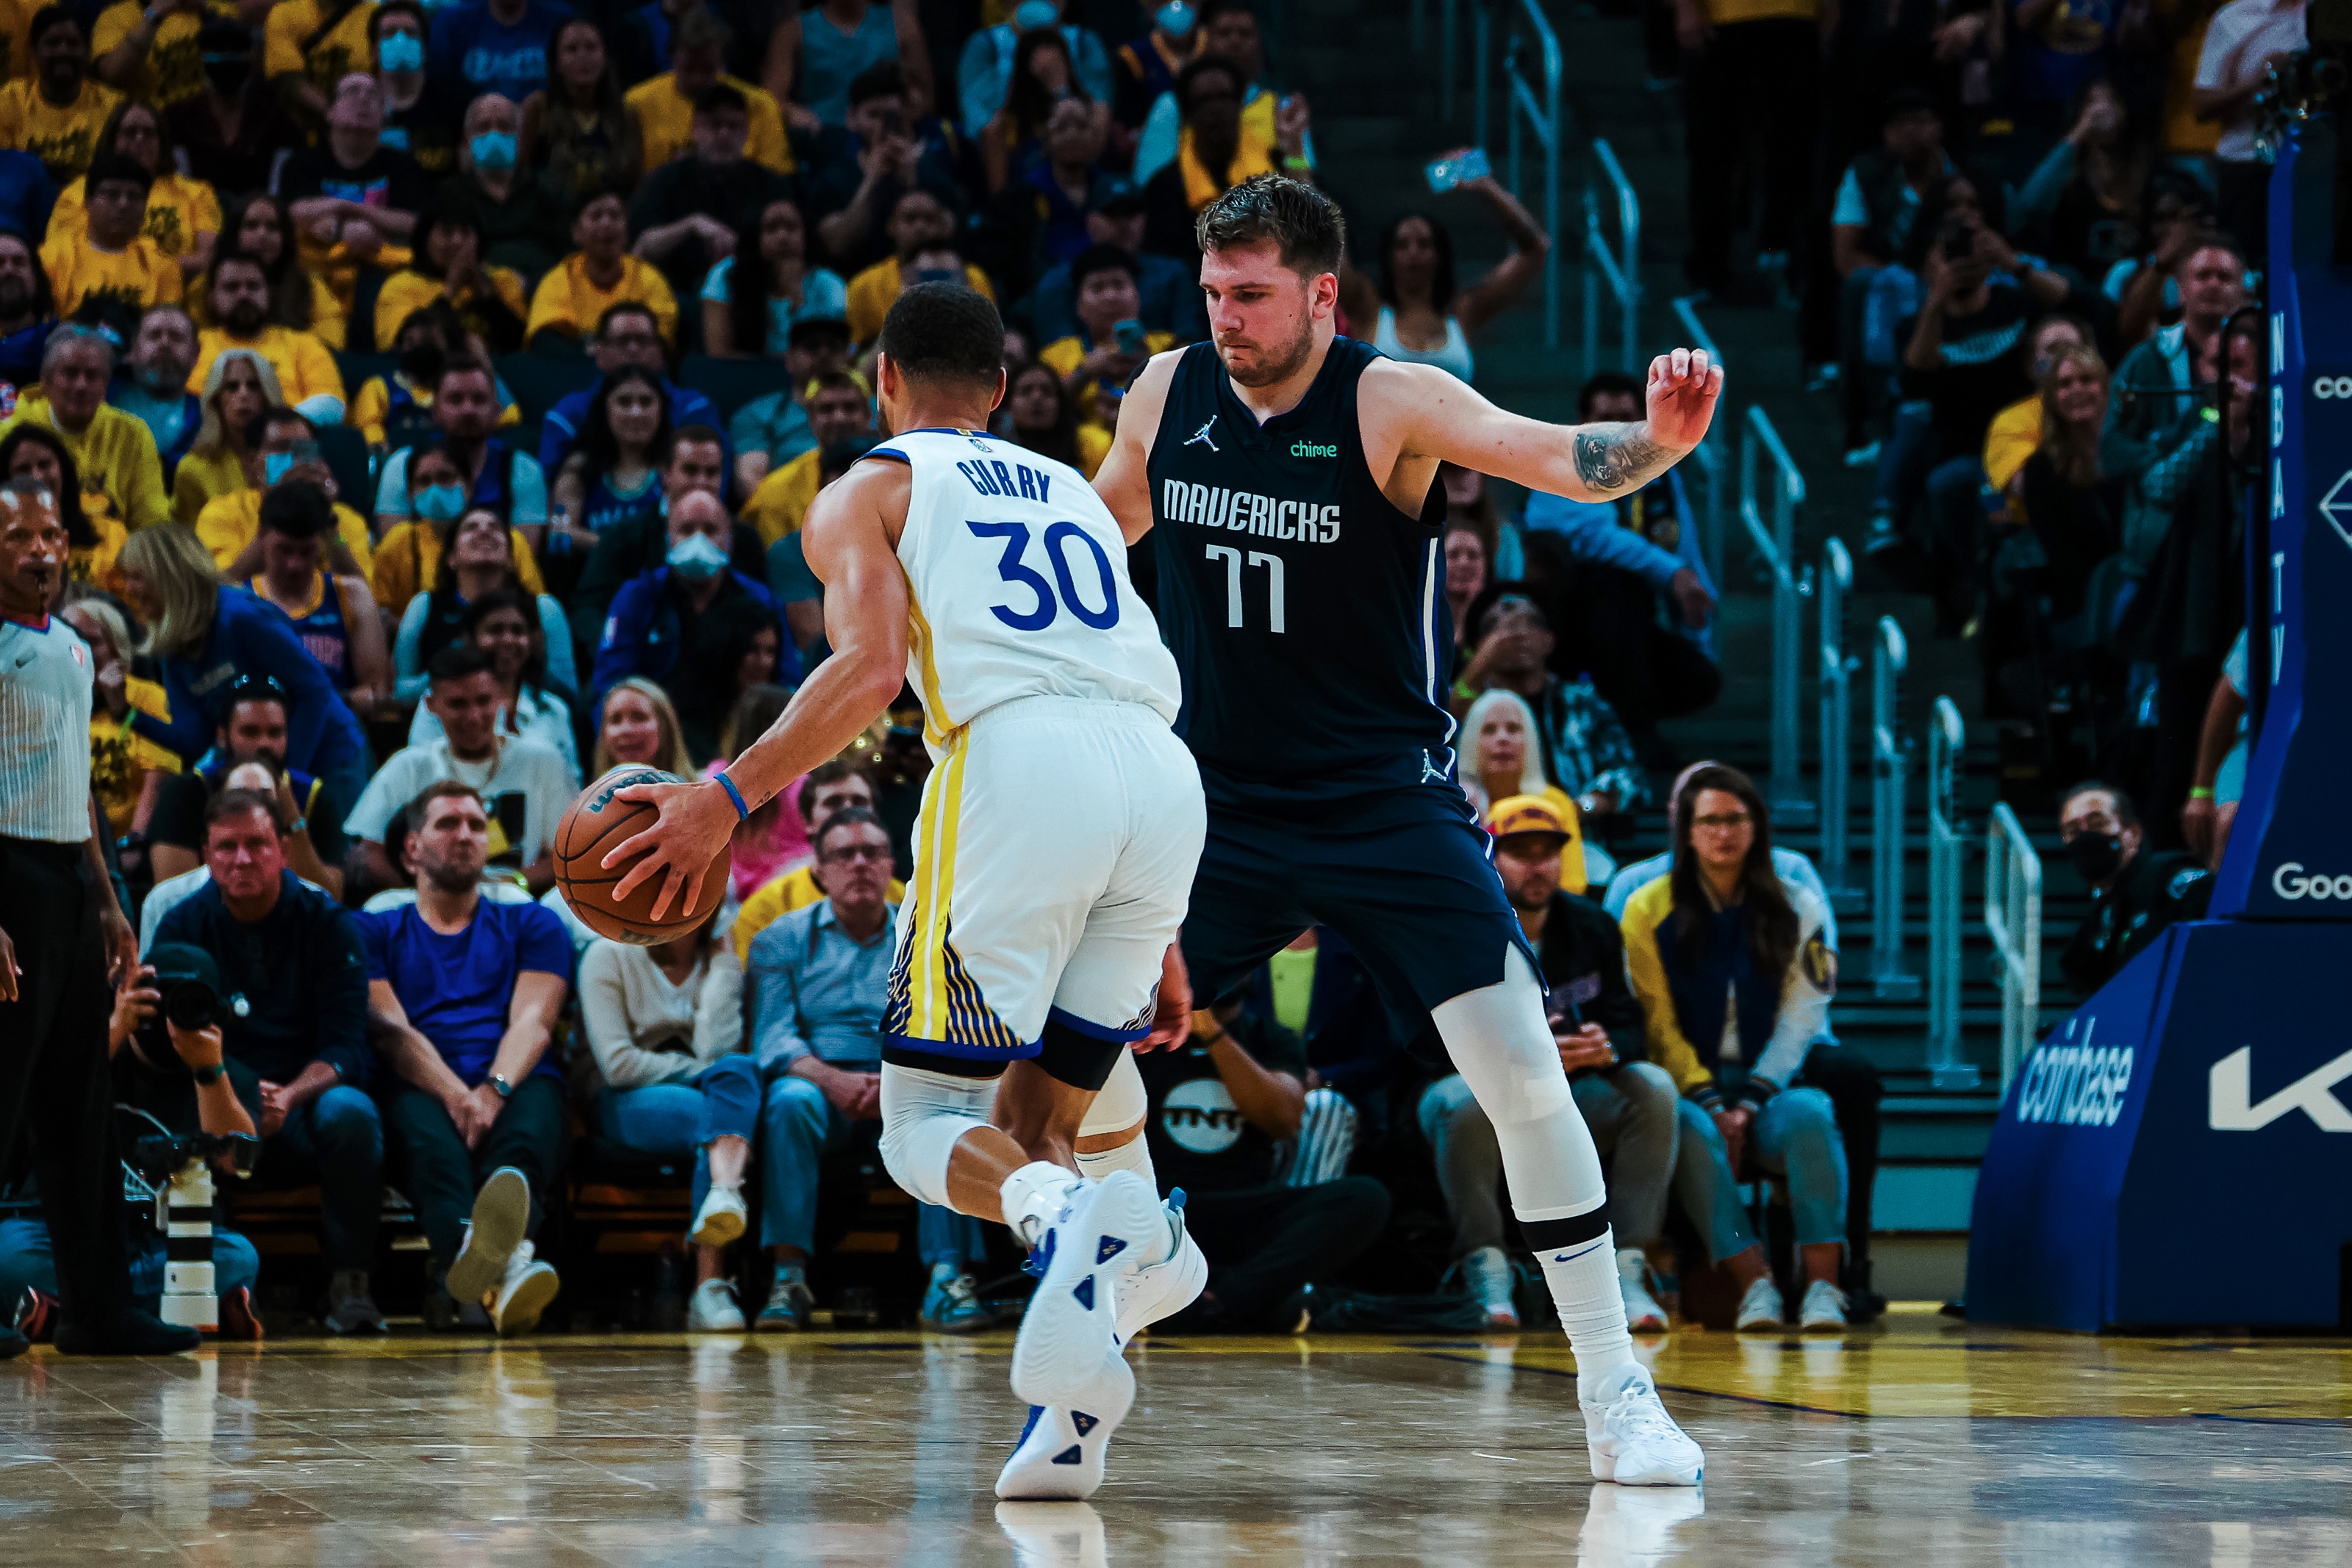 Doncic already thinking about making improvements in the offseason